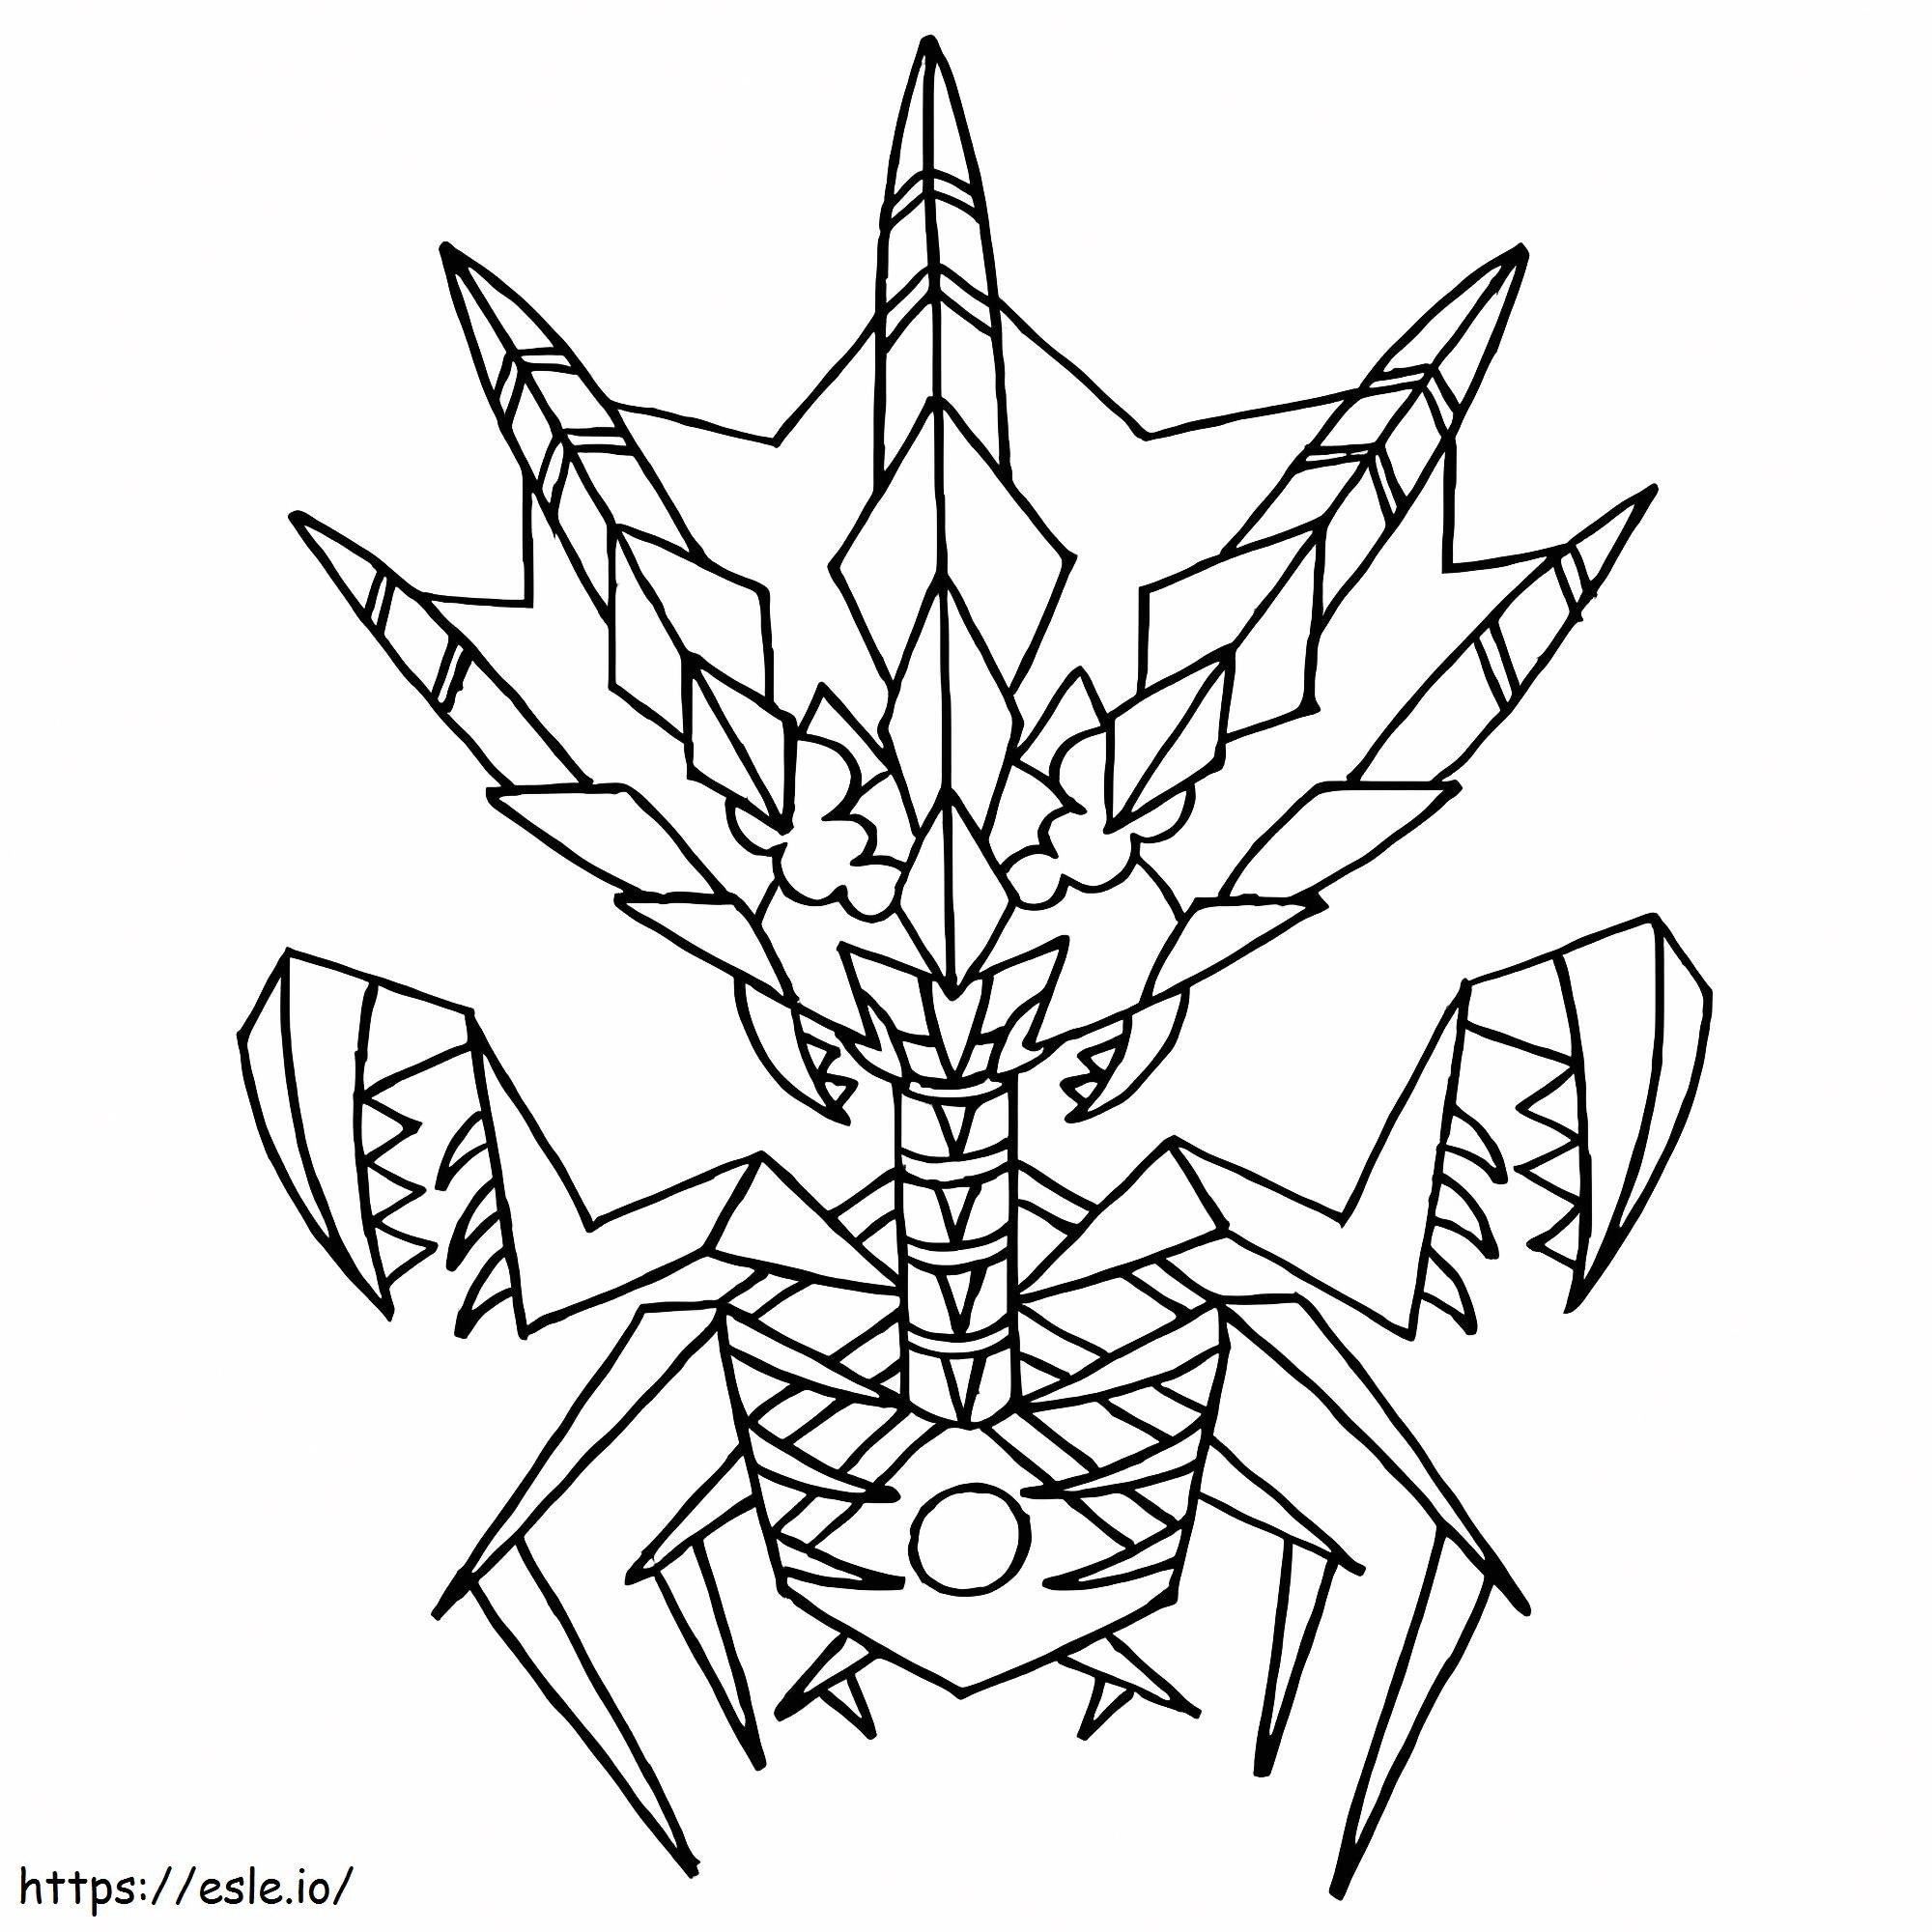 Eternal 2 coloring page